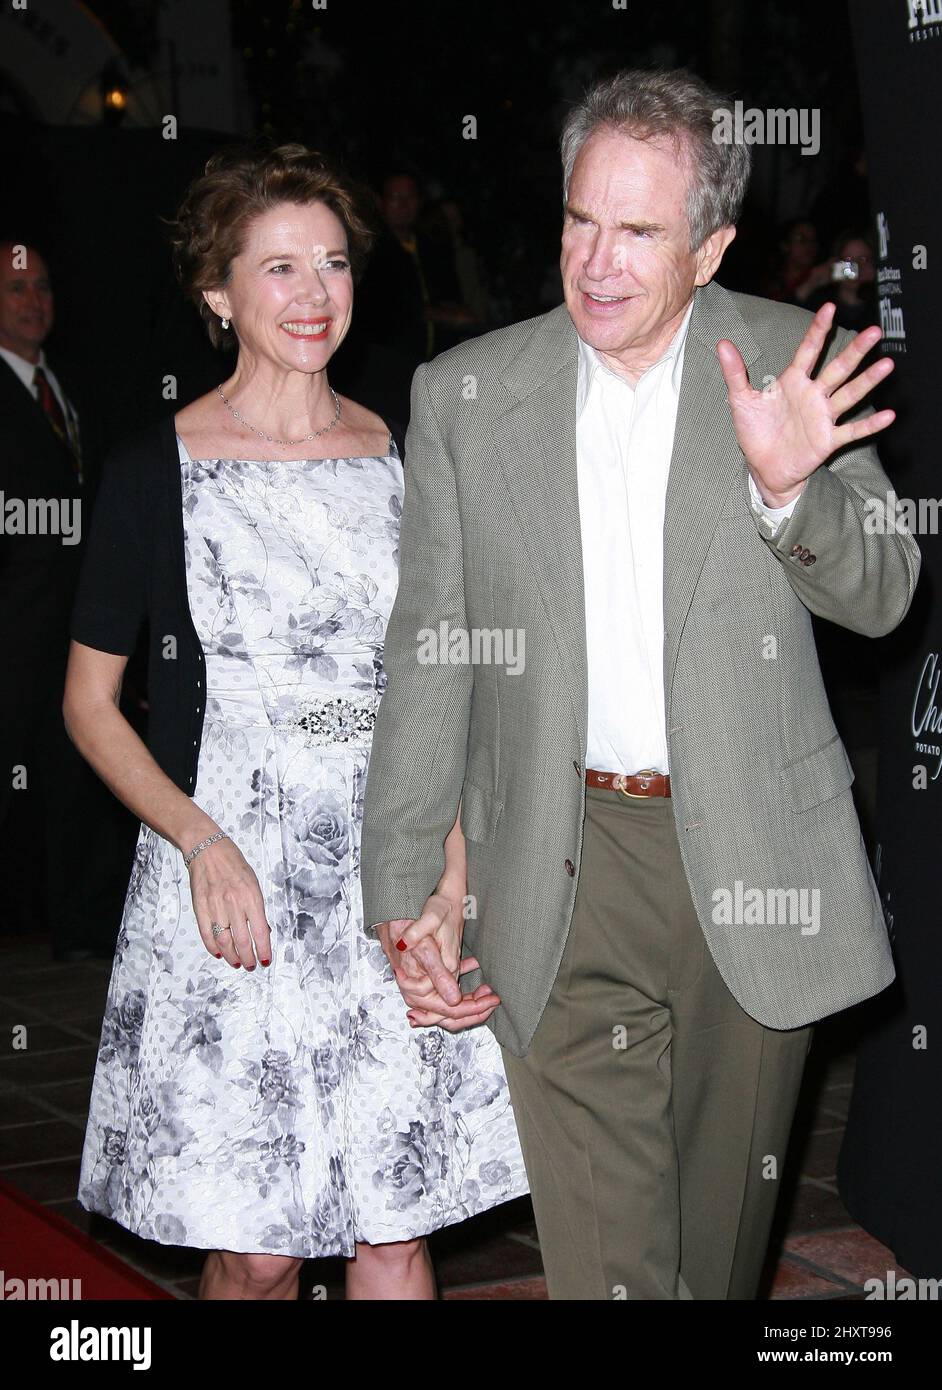 Warren Beatty with wife Annette Bening as she is honored with the American Riviera Award at the 2011 Santa Barbara International Film Festival held at the Arlington Theater in Santa Barbara, CA. Stock Photo